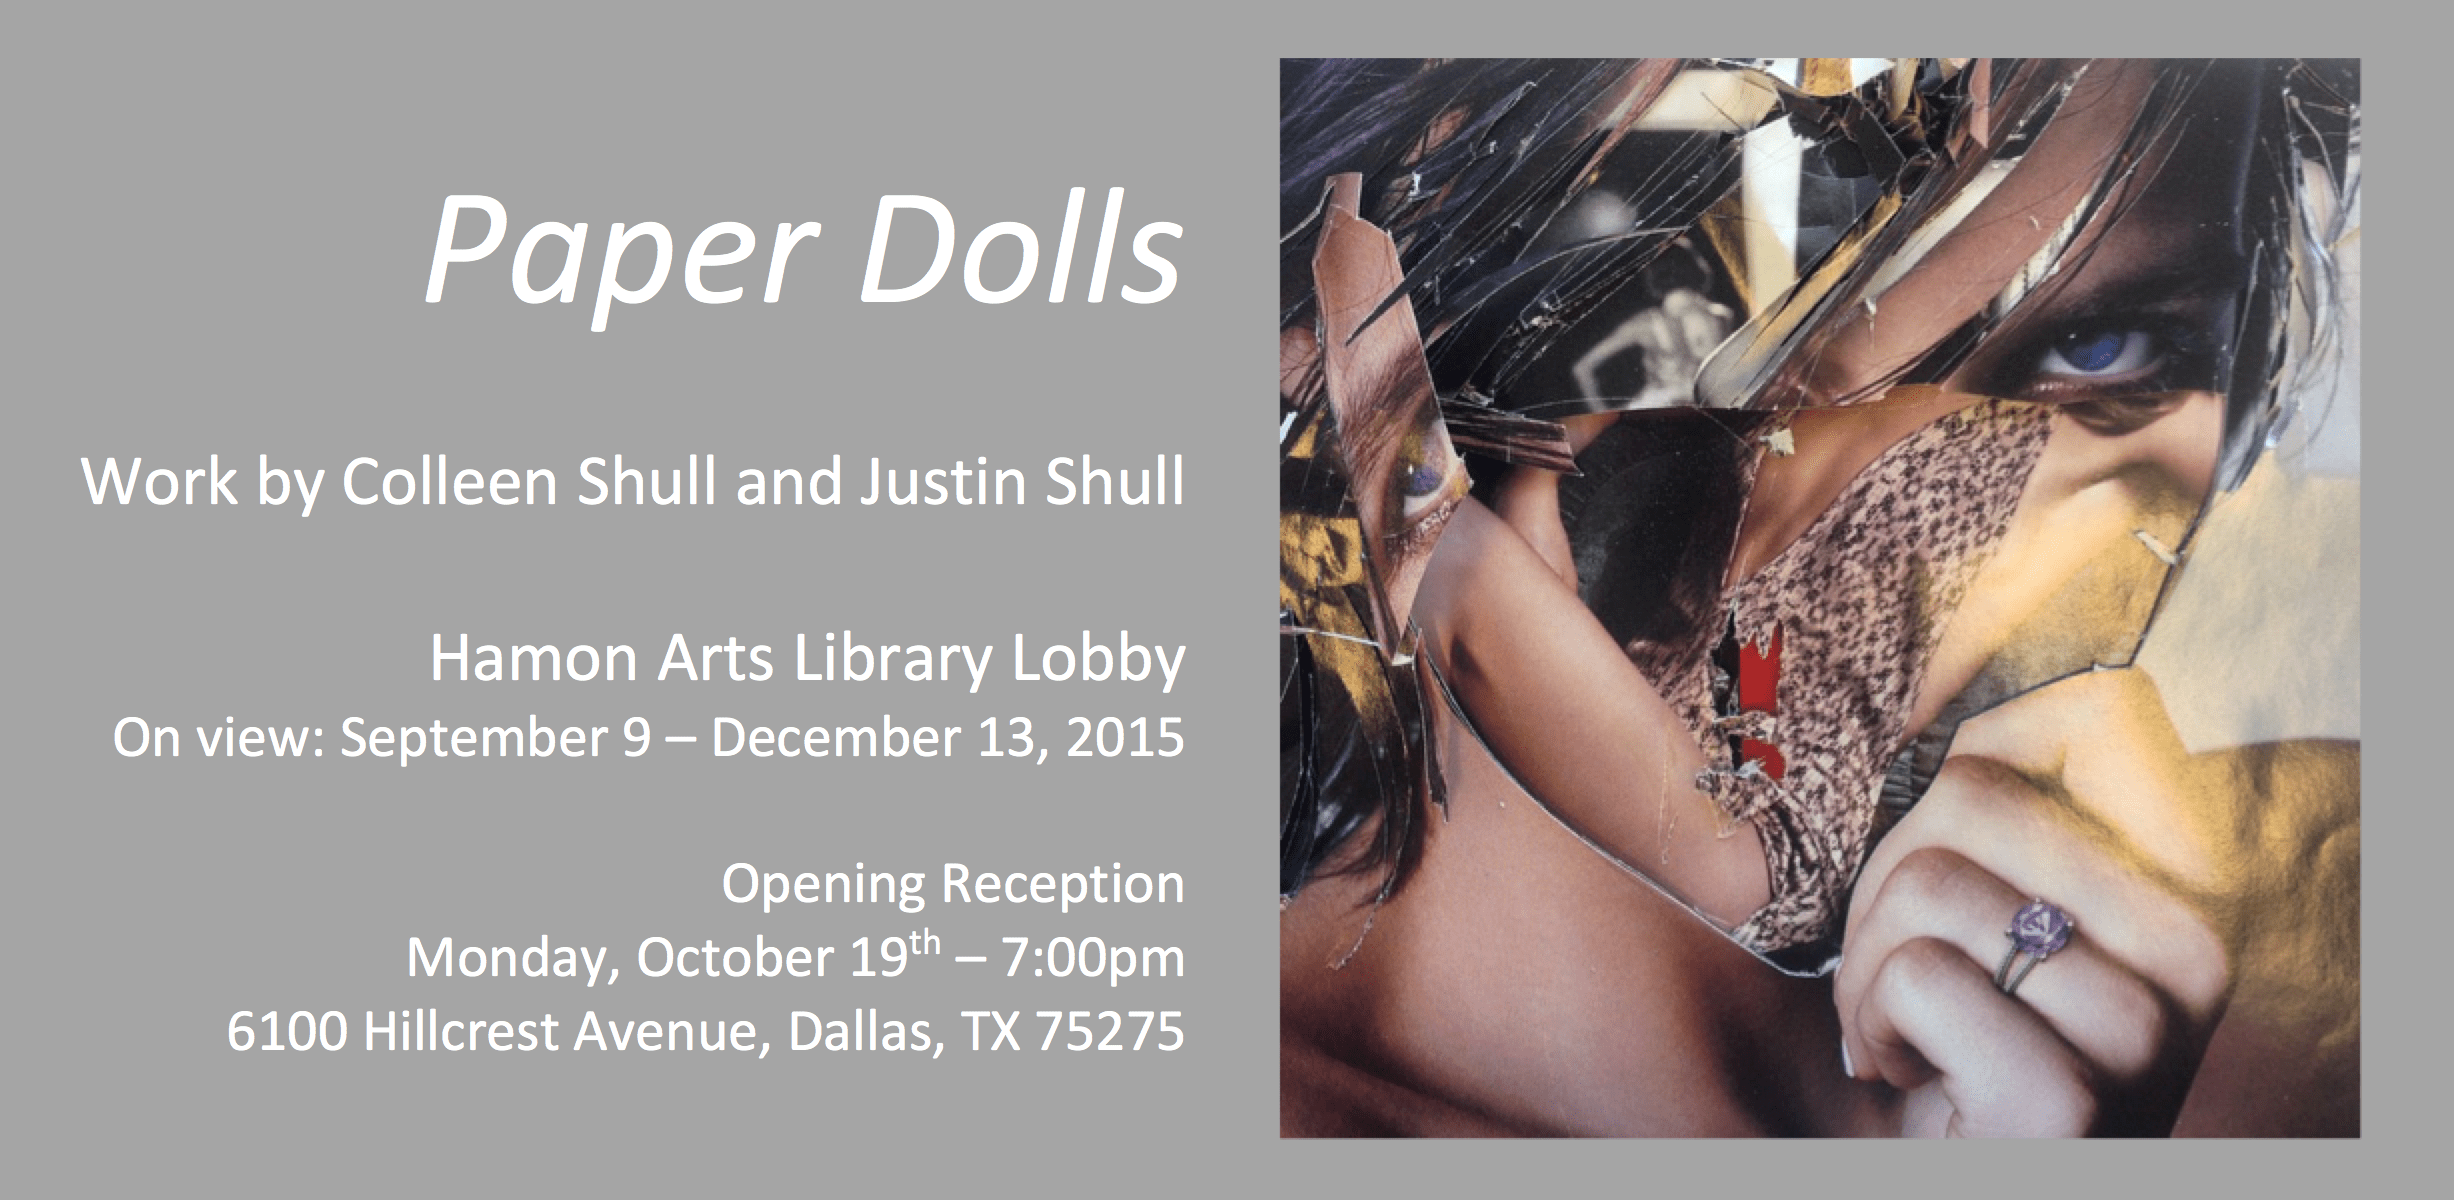 Paper Dolls Exhibition and Reception